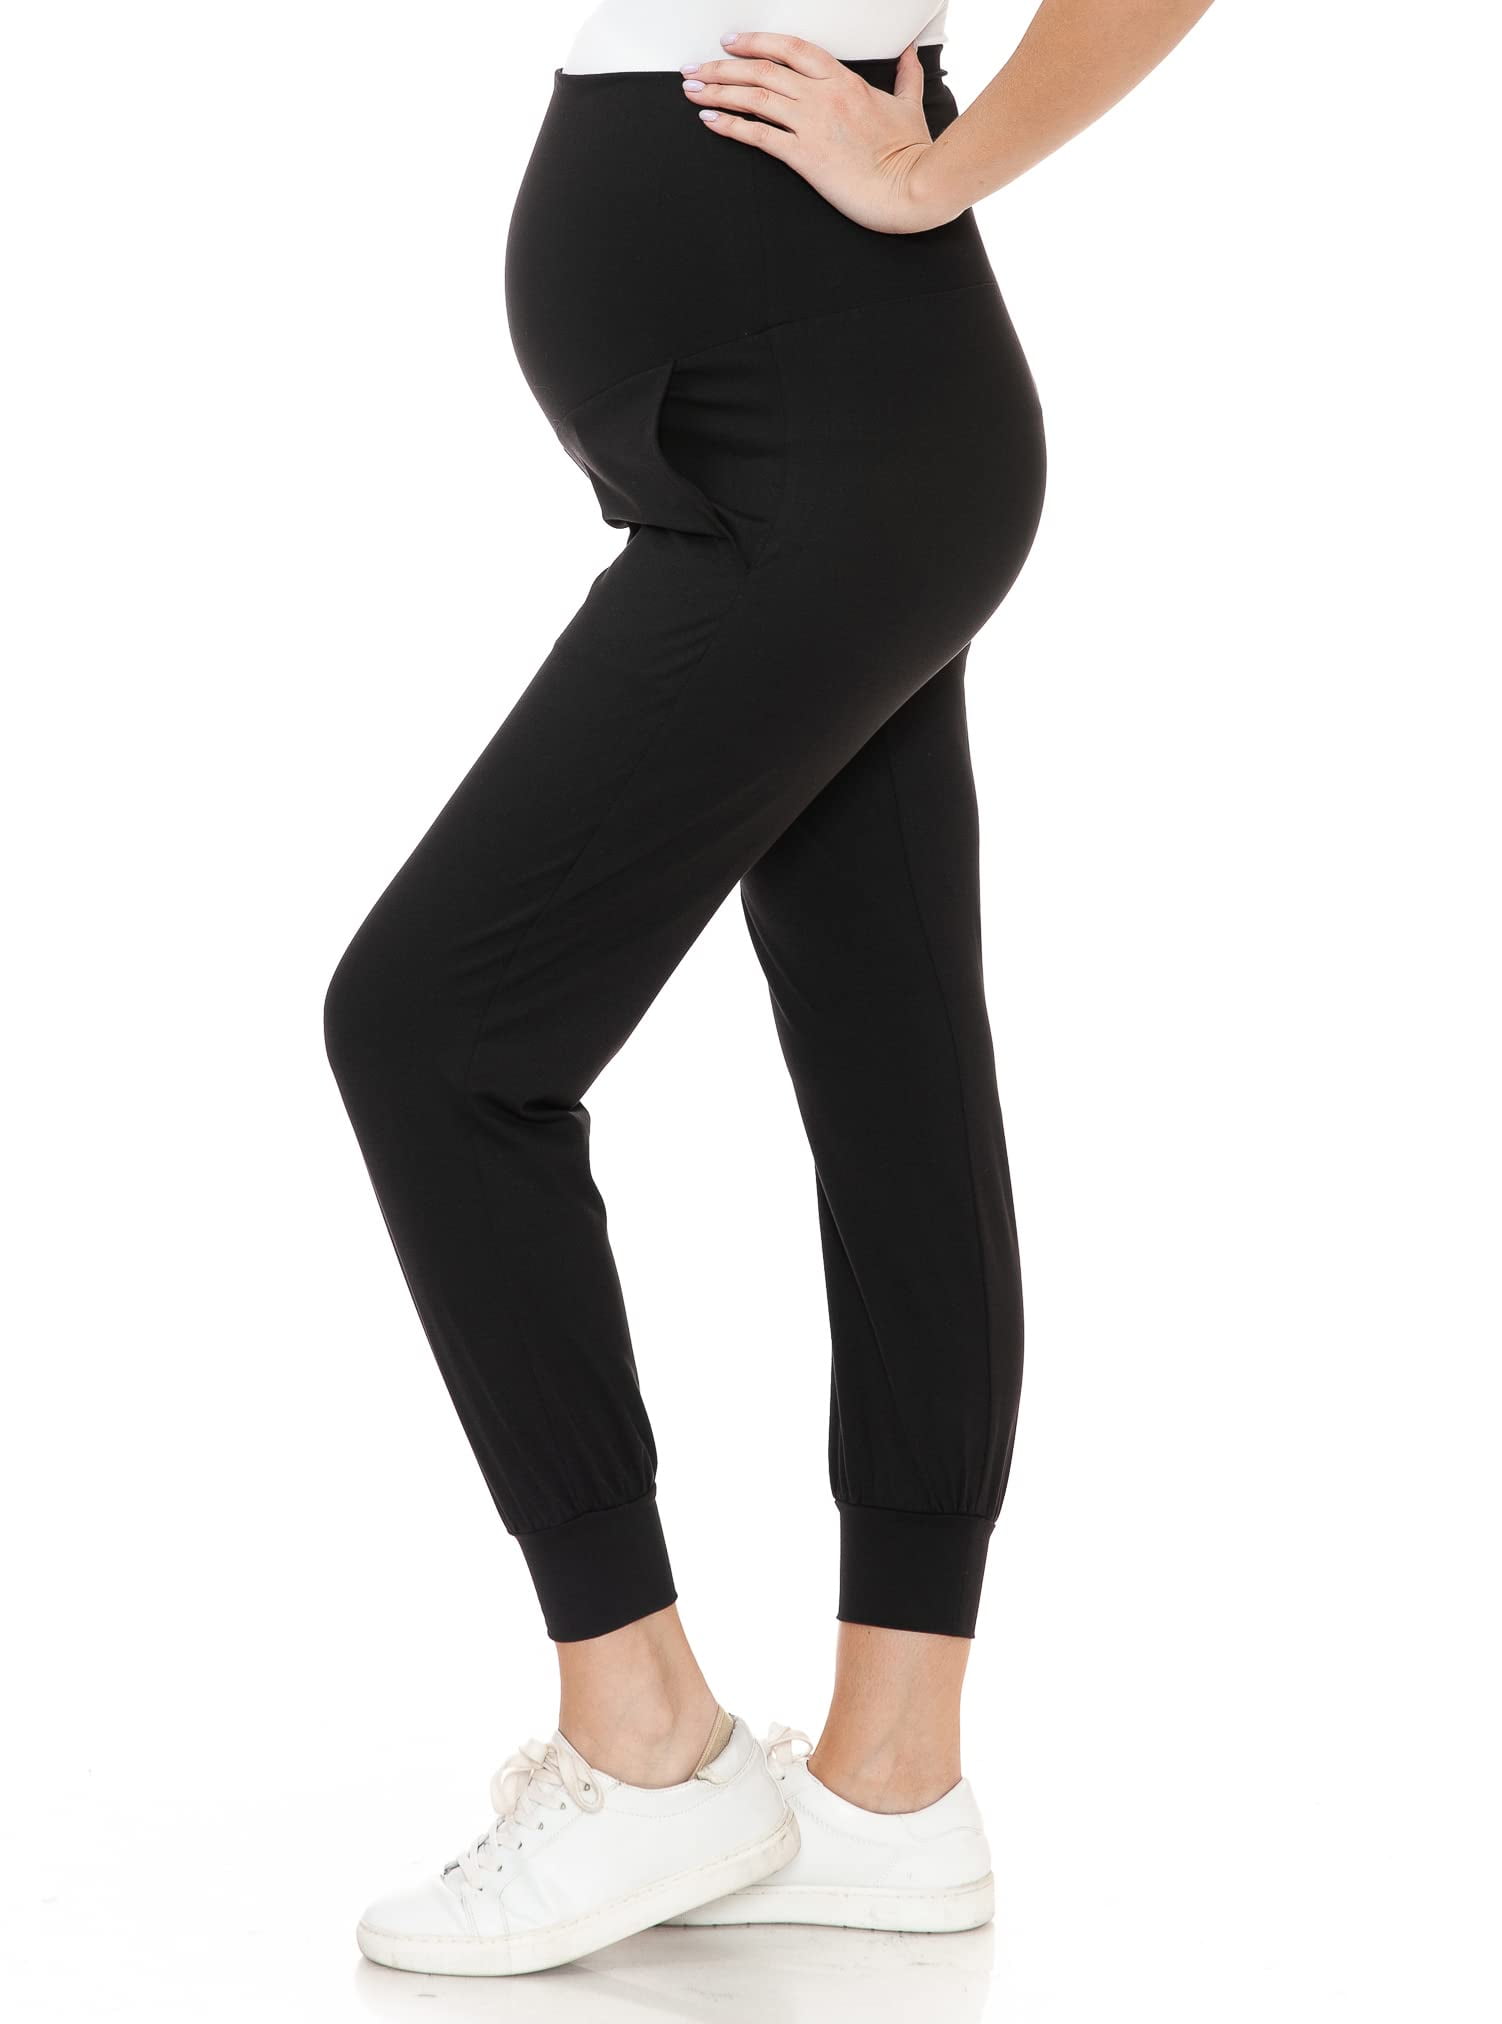 Leggings Depot Maternity Pants for Women Over The Belly Pregnancy Joggers  Casual Lounge Pants S 